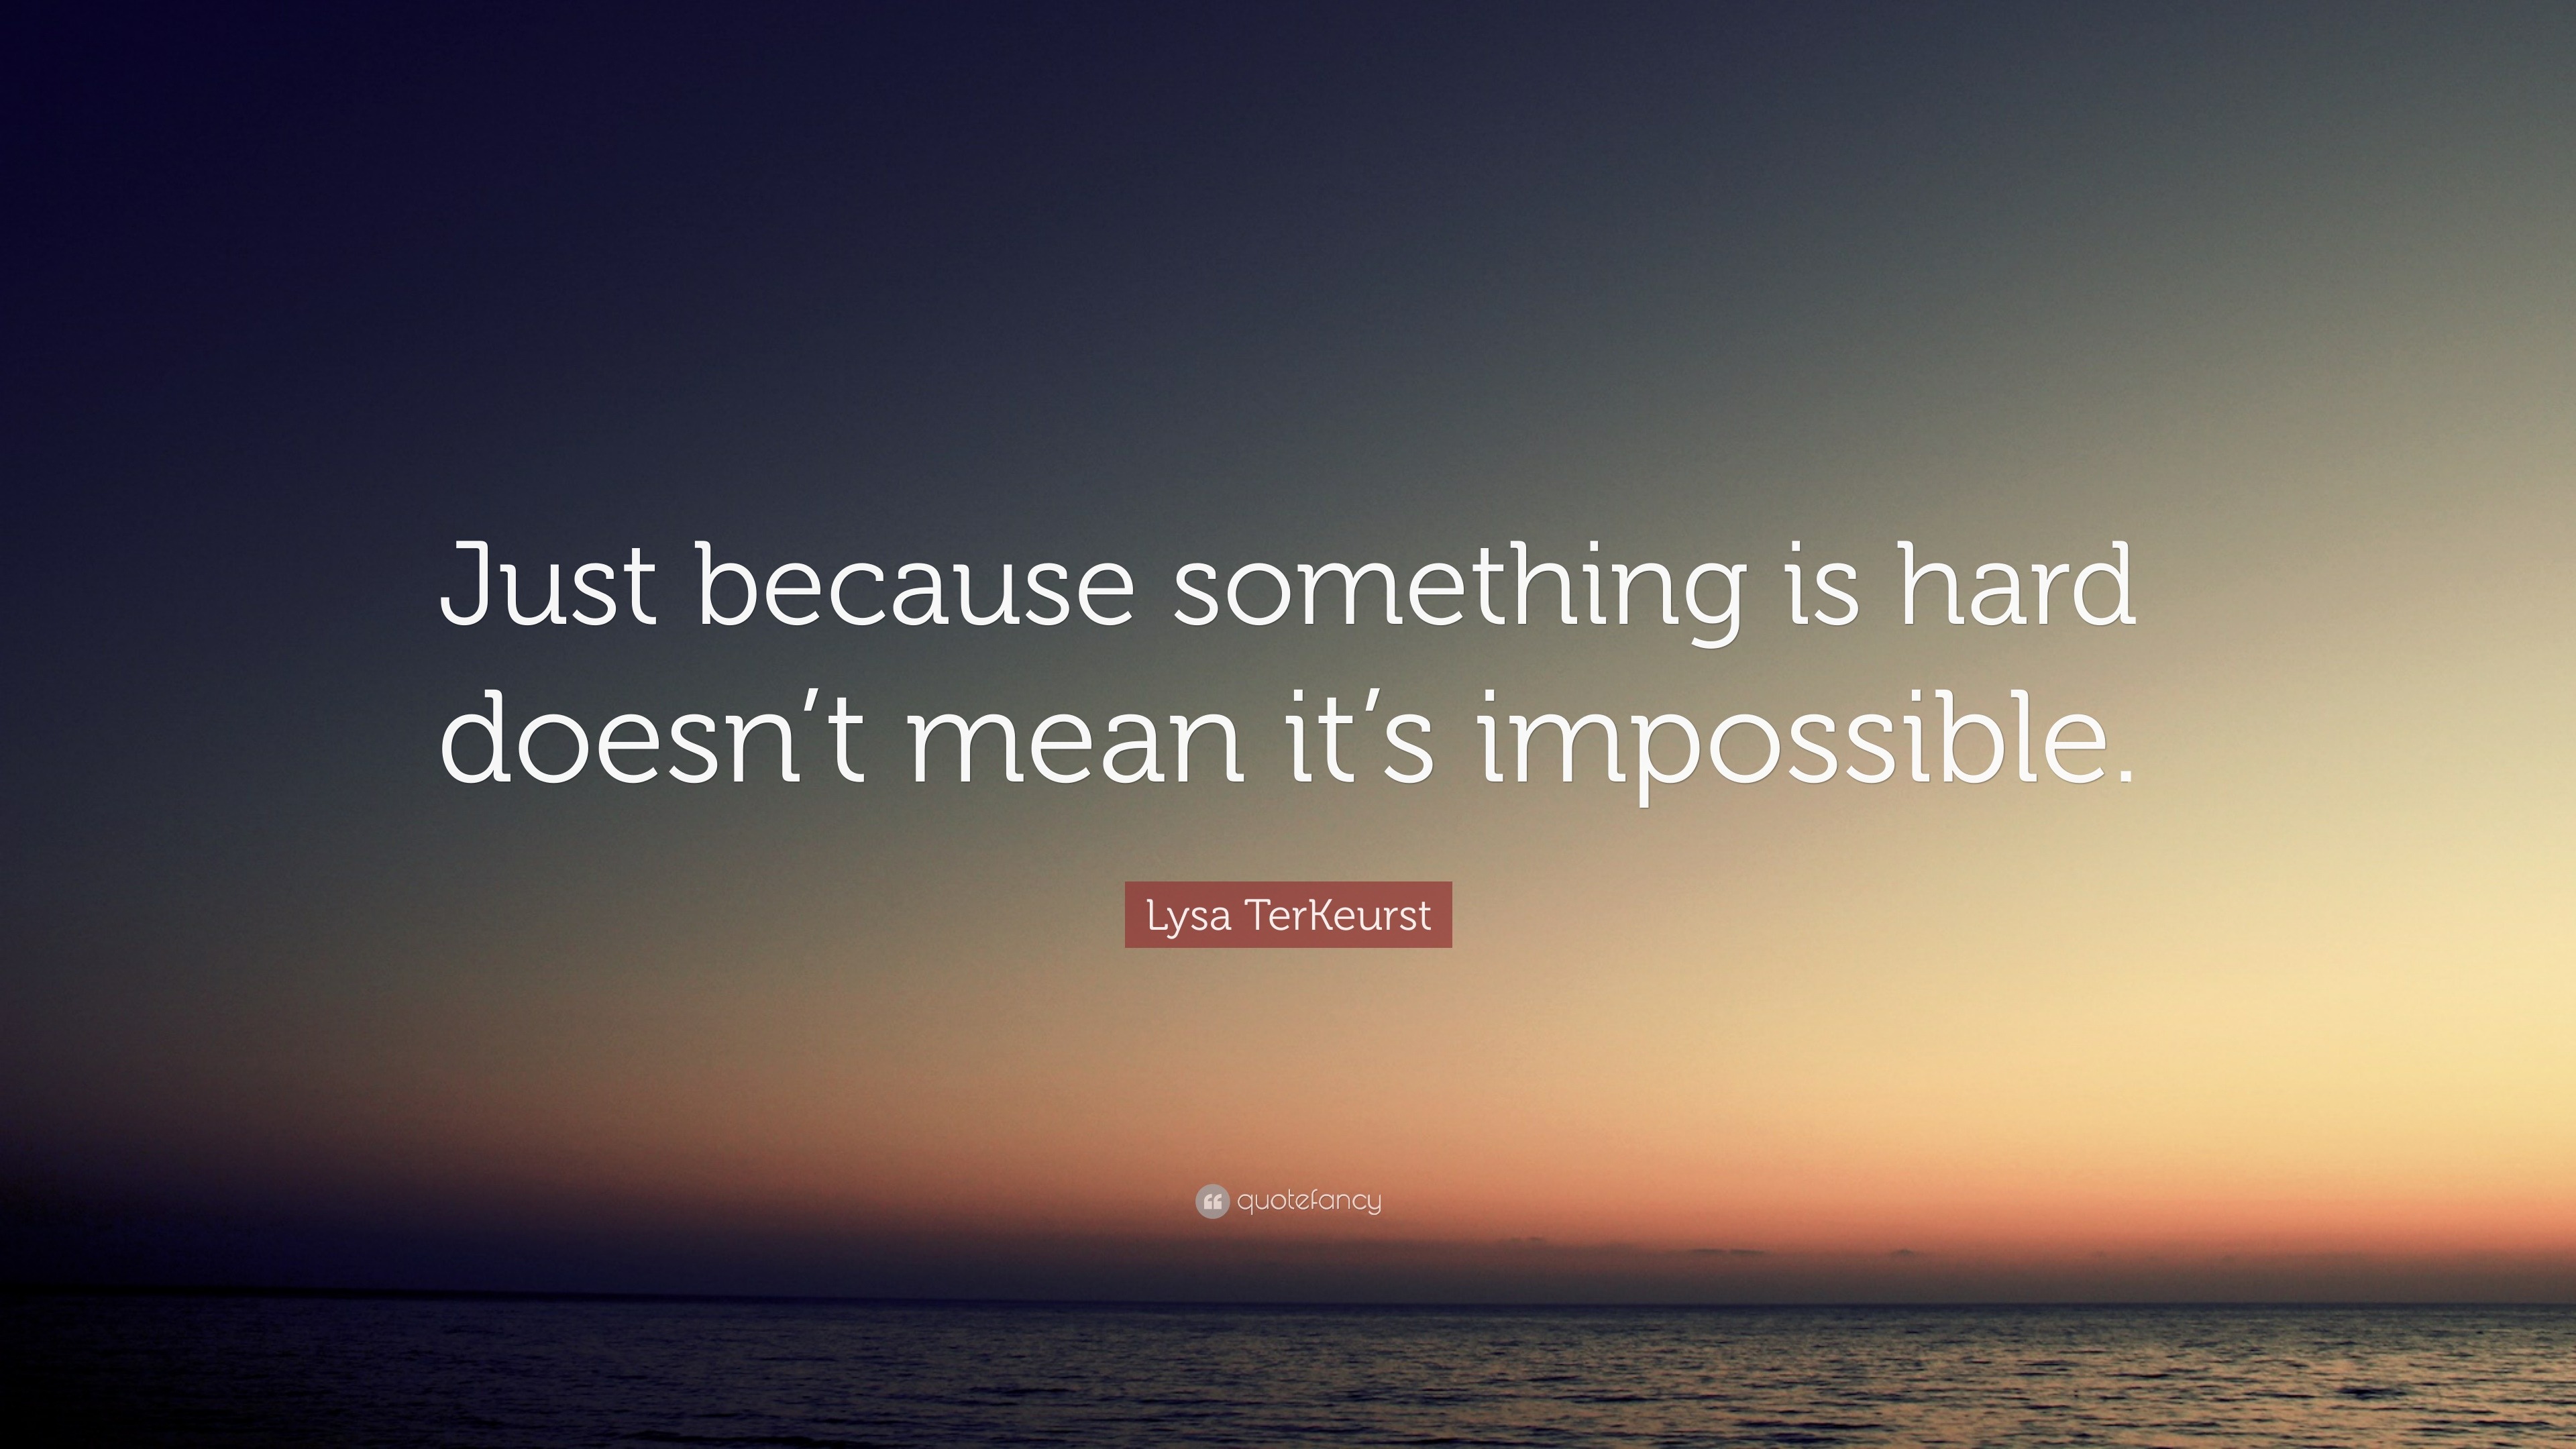 Lysa Terkeurst Quote Just Because Something Is Hard Doesn T Mean It S Impossible 12 Wallpapers Quotefancy